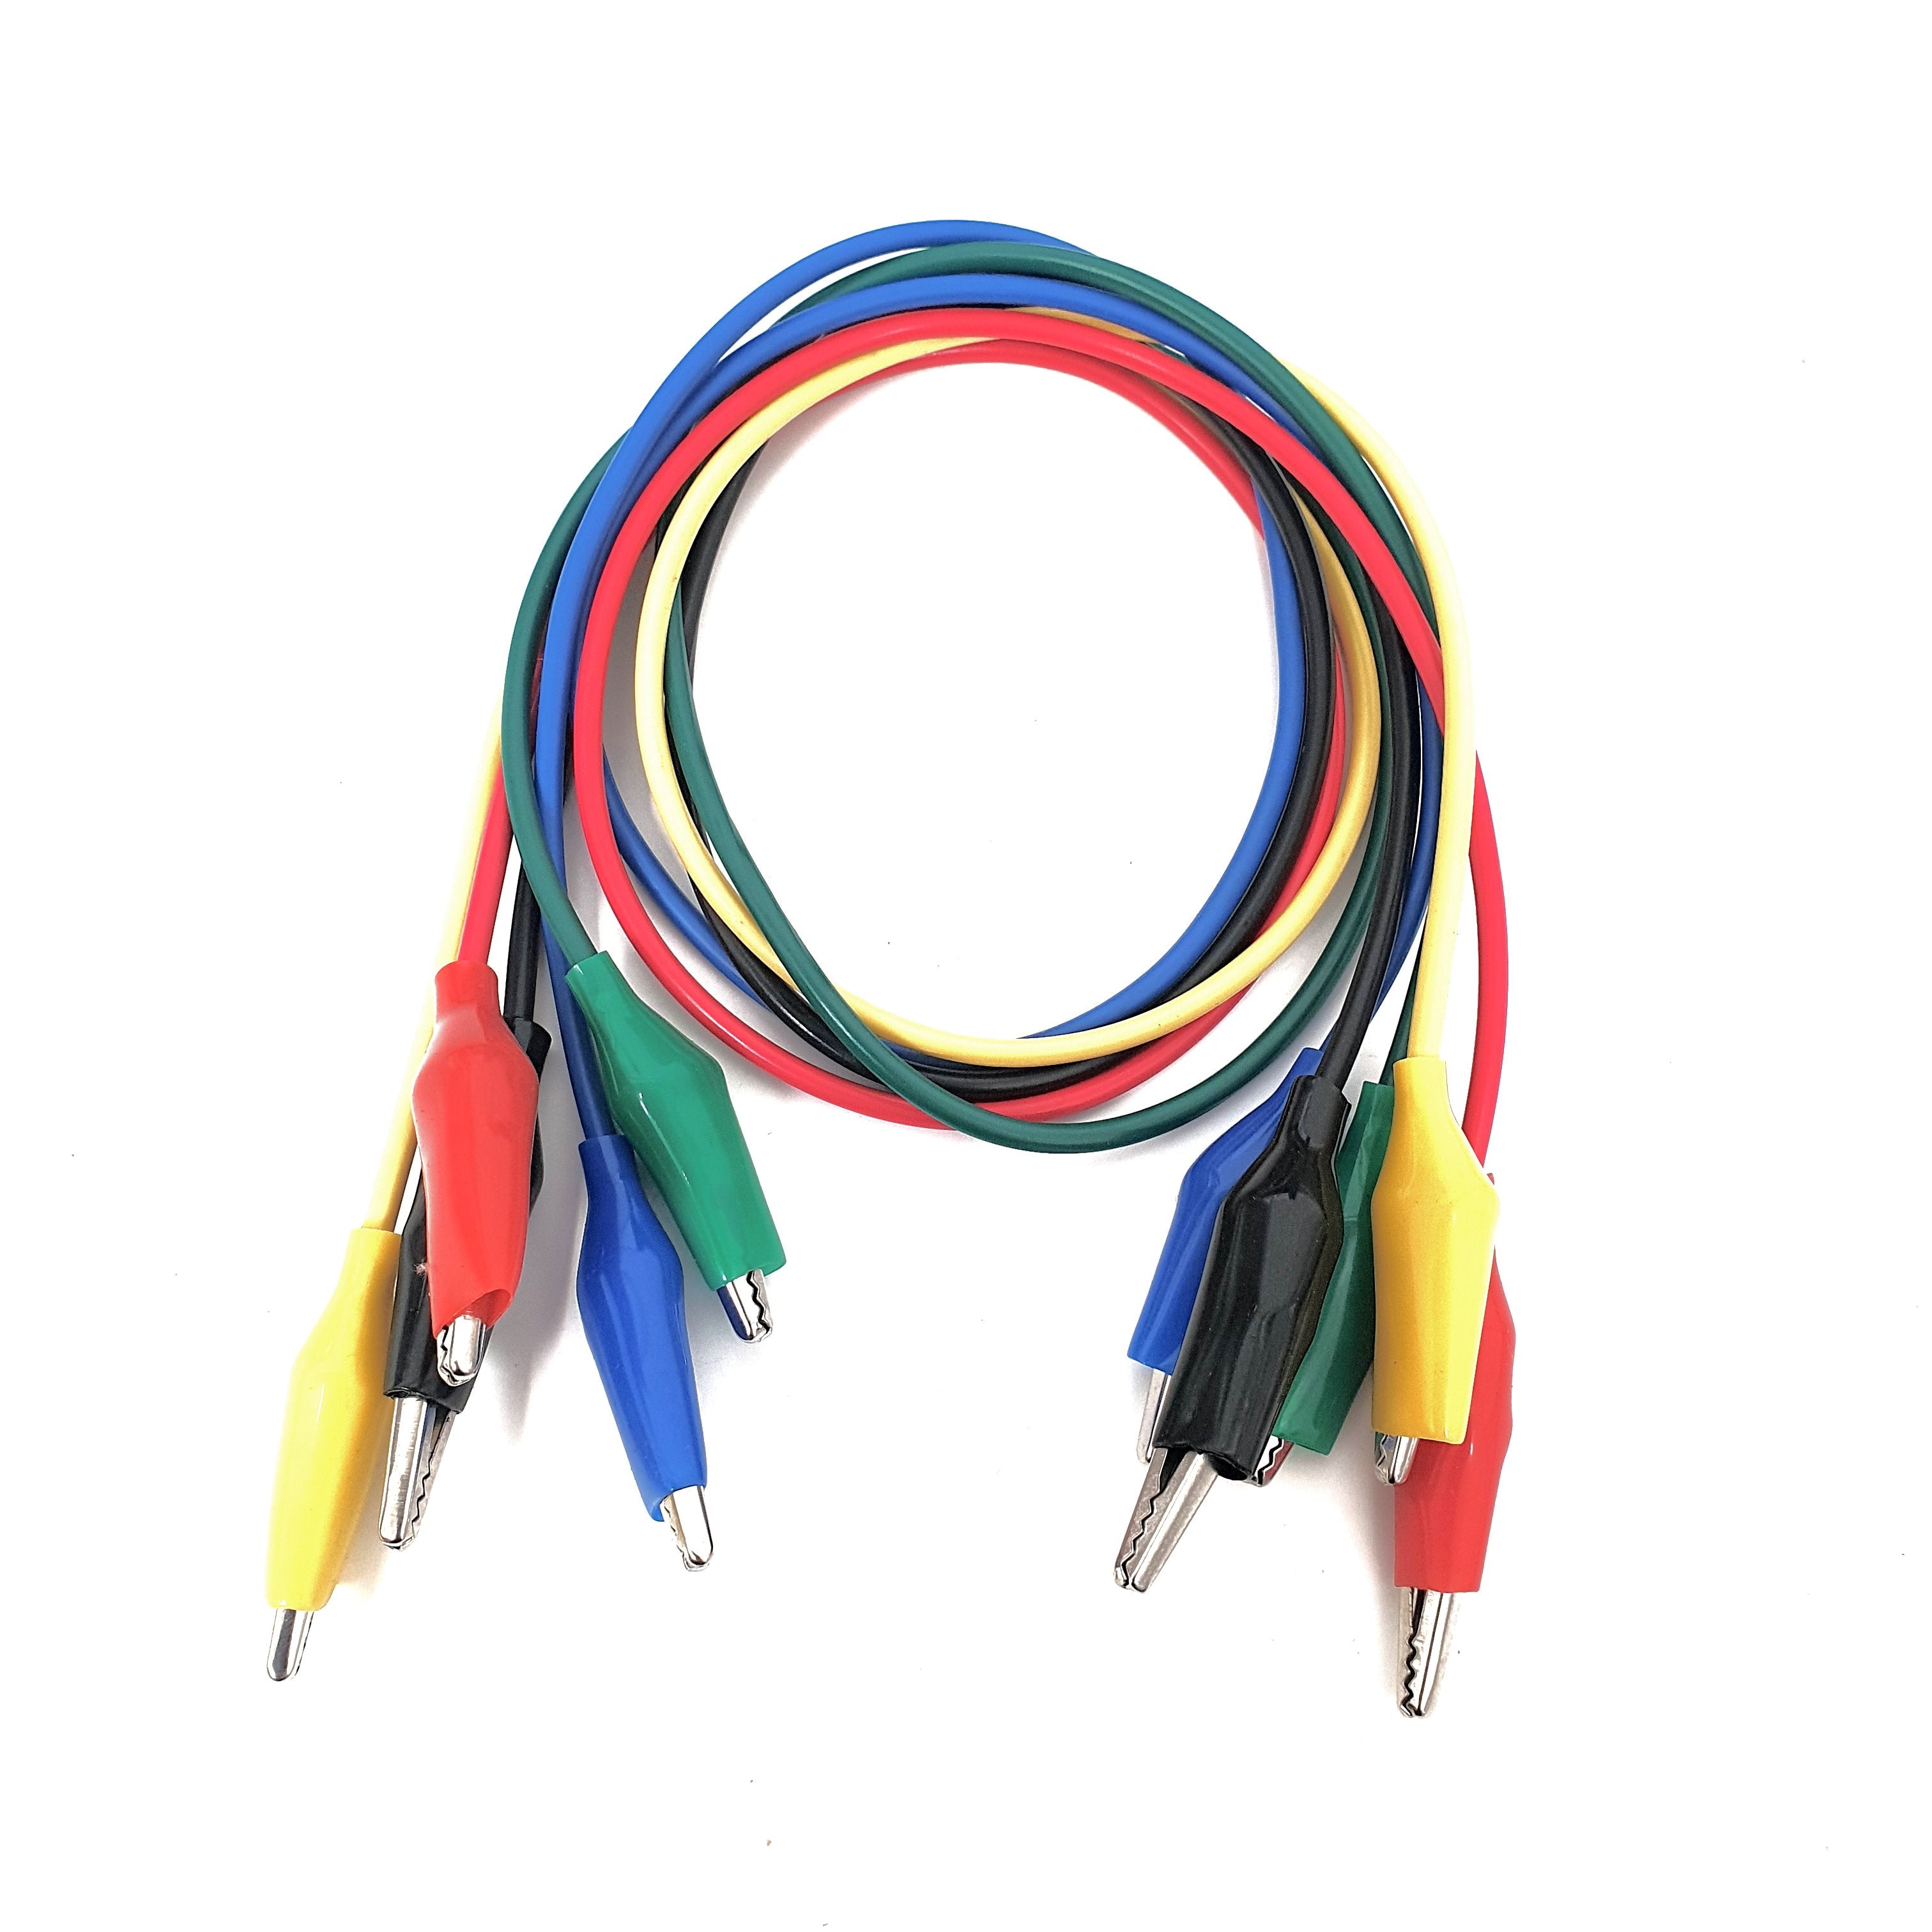 5pc Crocodile/Aligator Test Leads With Clips 50cm extra Flexible soldered connectors